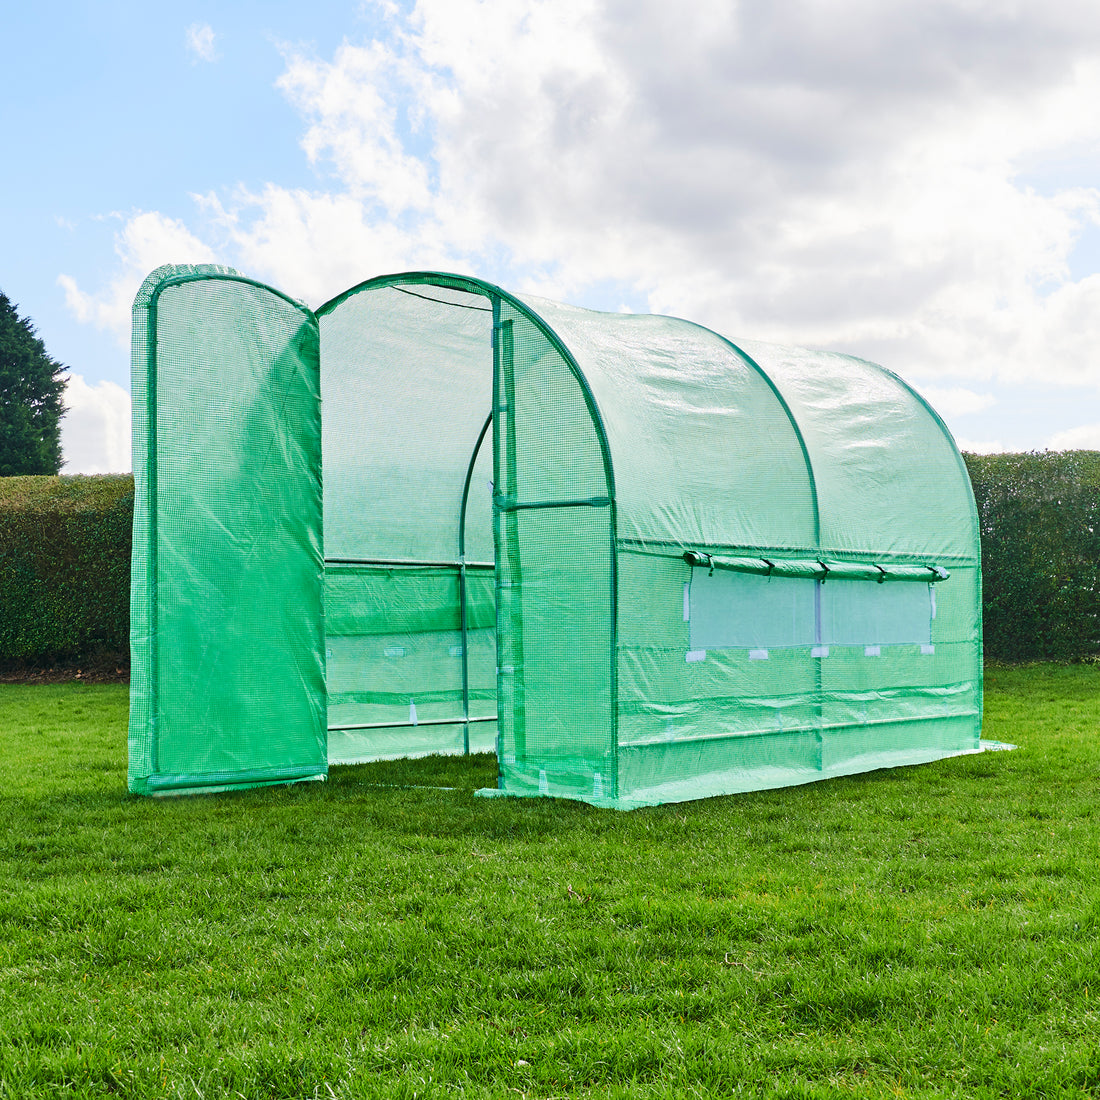 How to build a polytunnel greenhouse